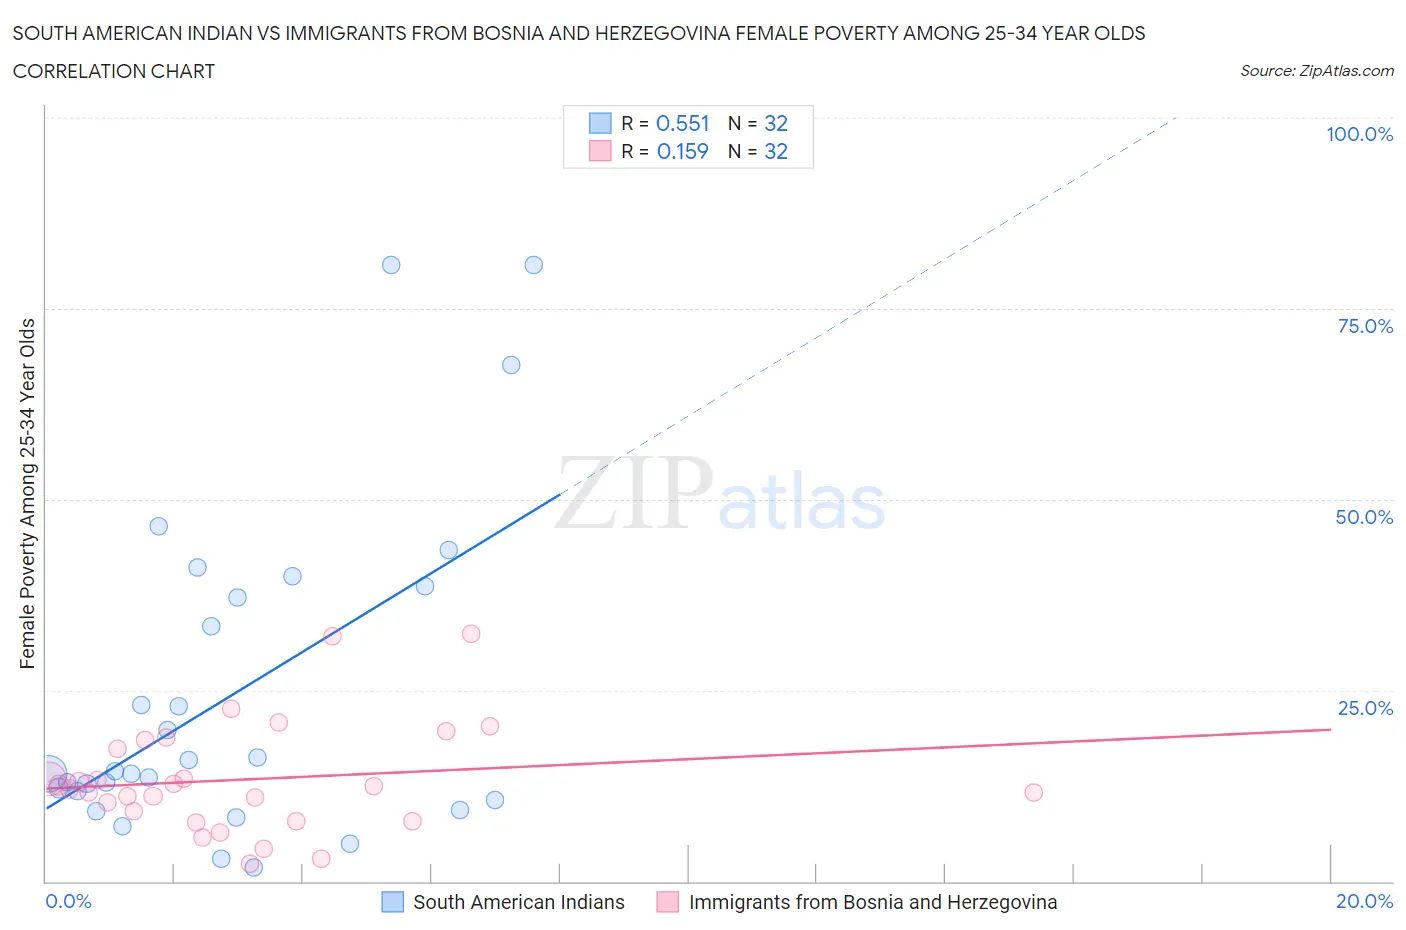 South American Indian vs Immigrants from Bosnia and Herzegovina Female Poverty Among 25-34 Year Olds